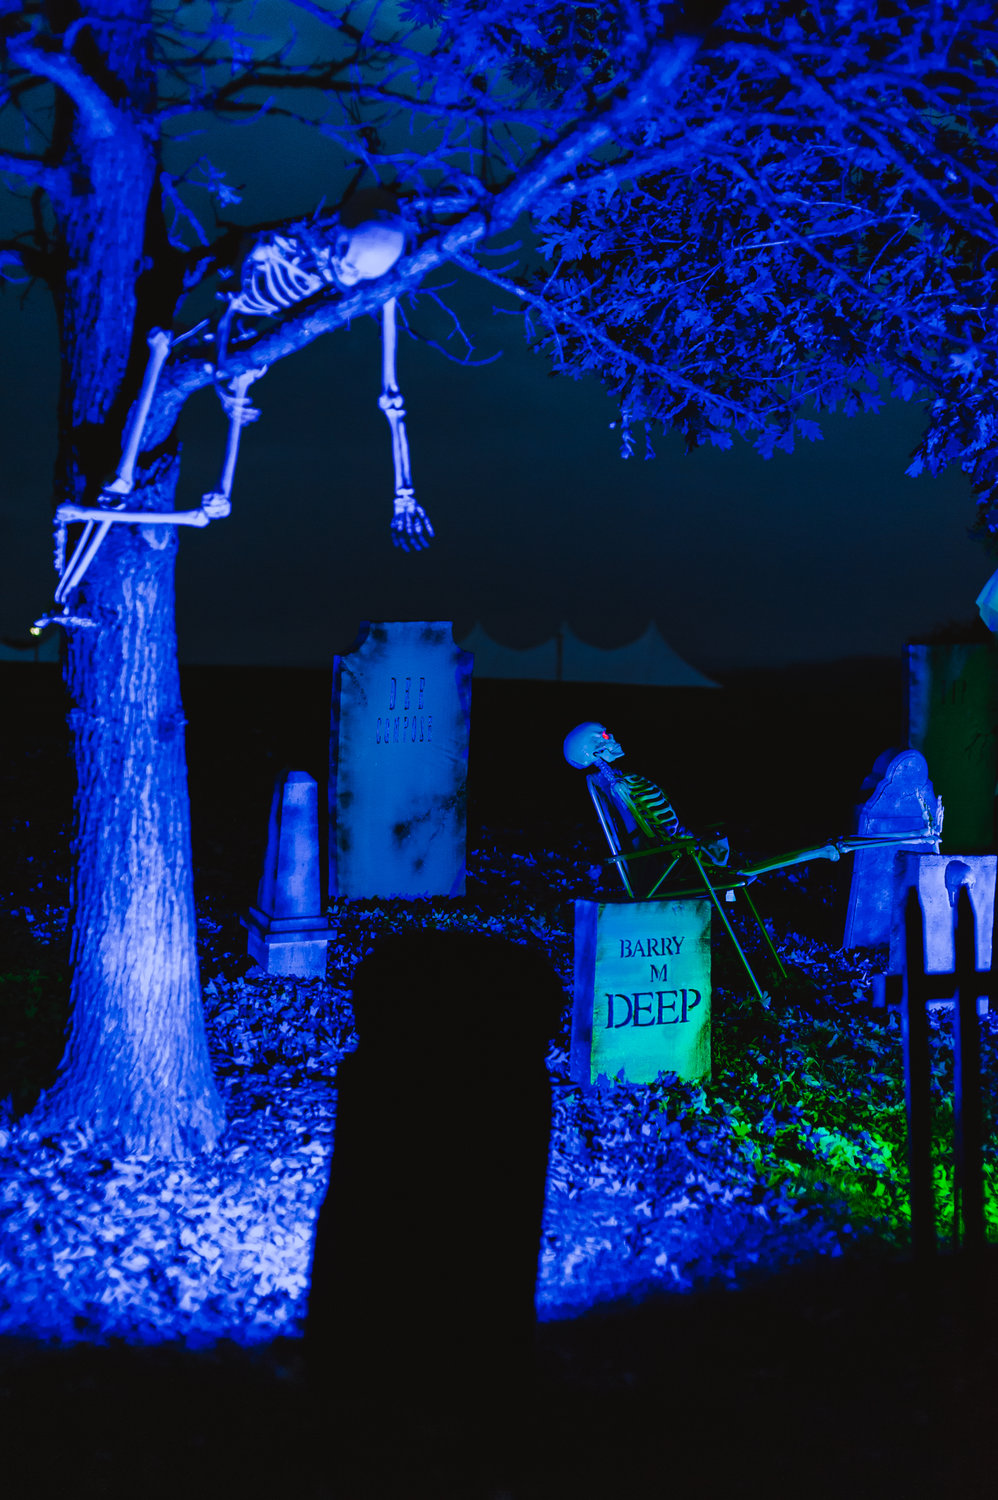 Wind your way through a skeleton graveyard….if you dare!